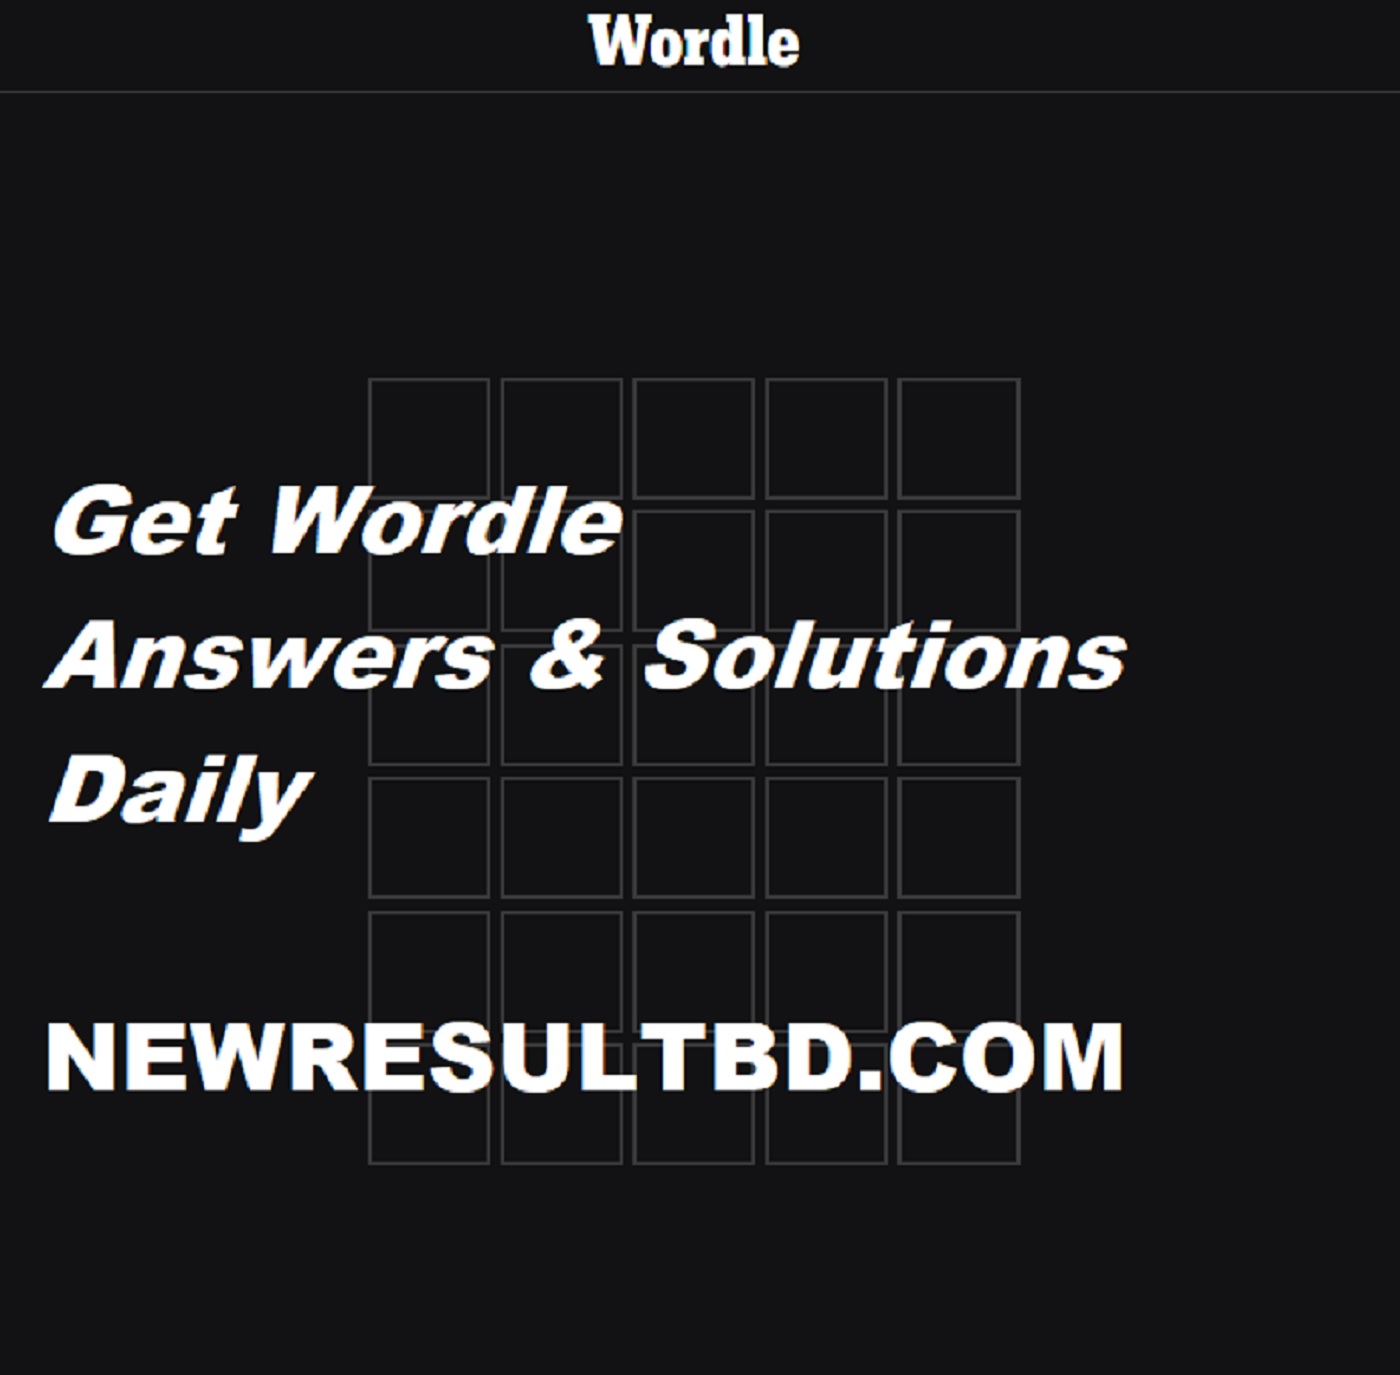 Today’s Wordle Answer, Get Wordle Answers & Solutions Daily